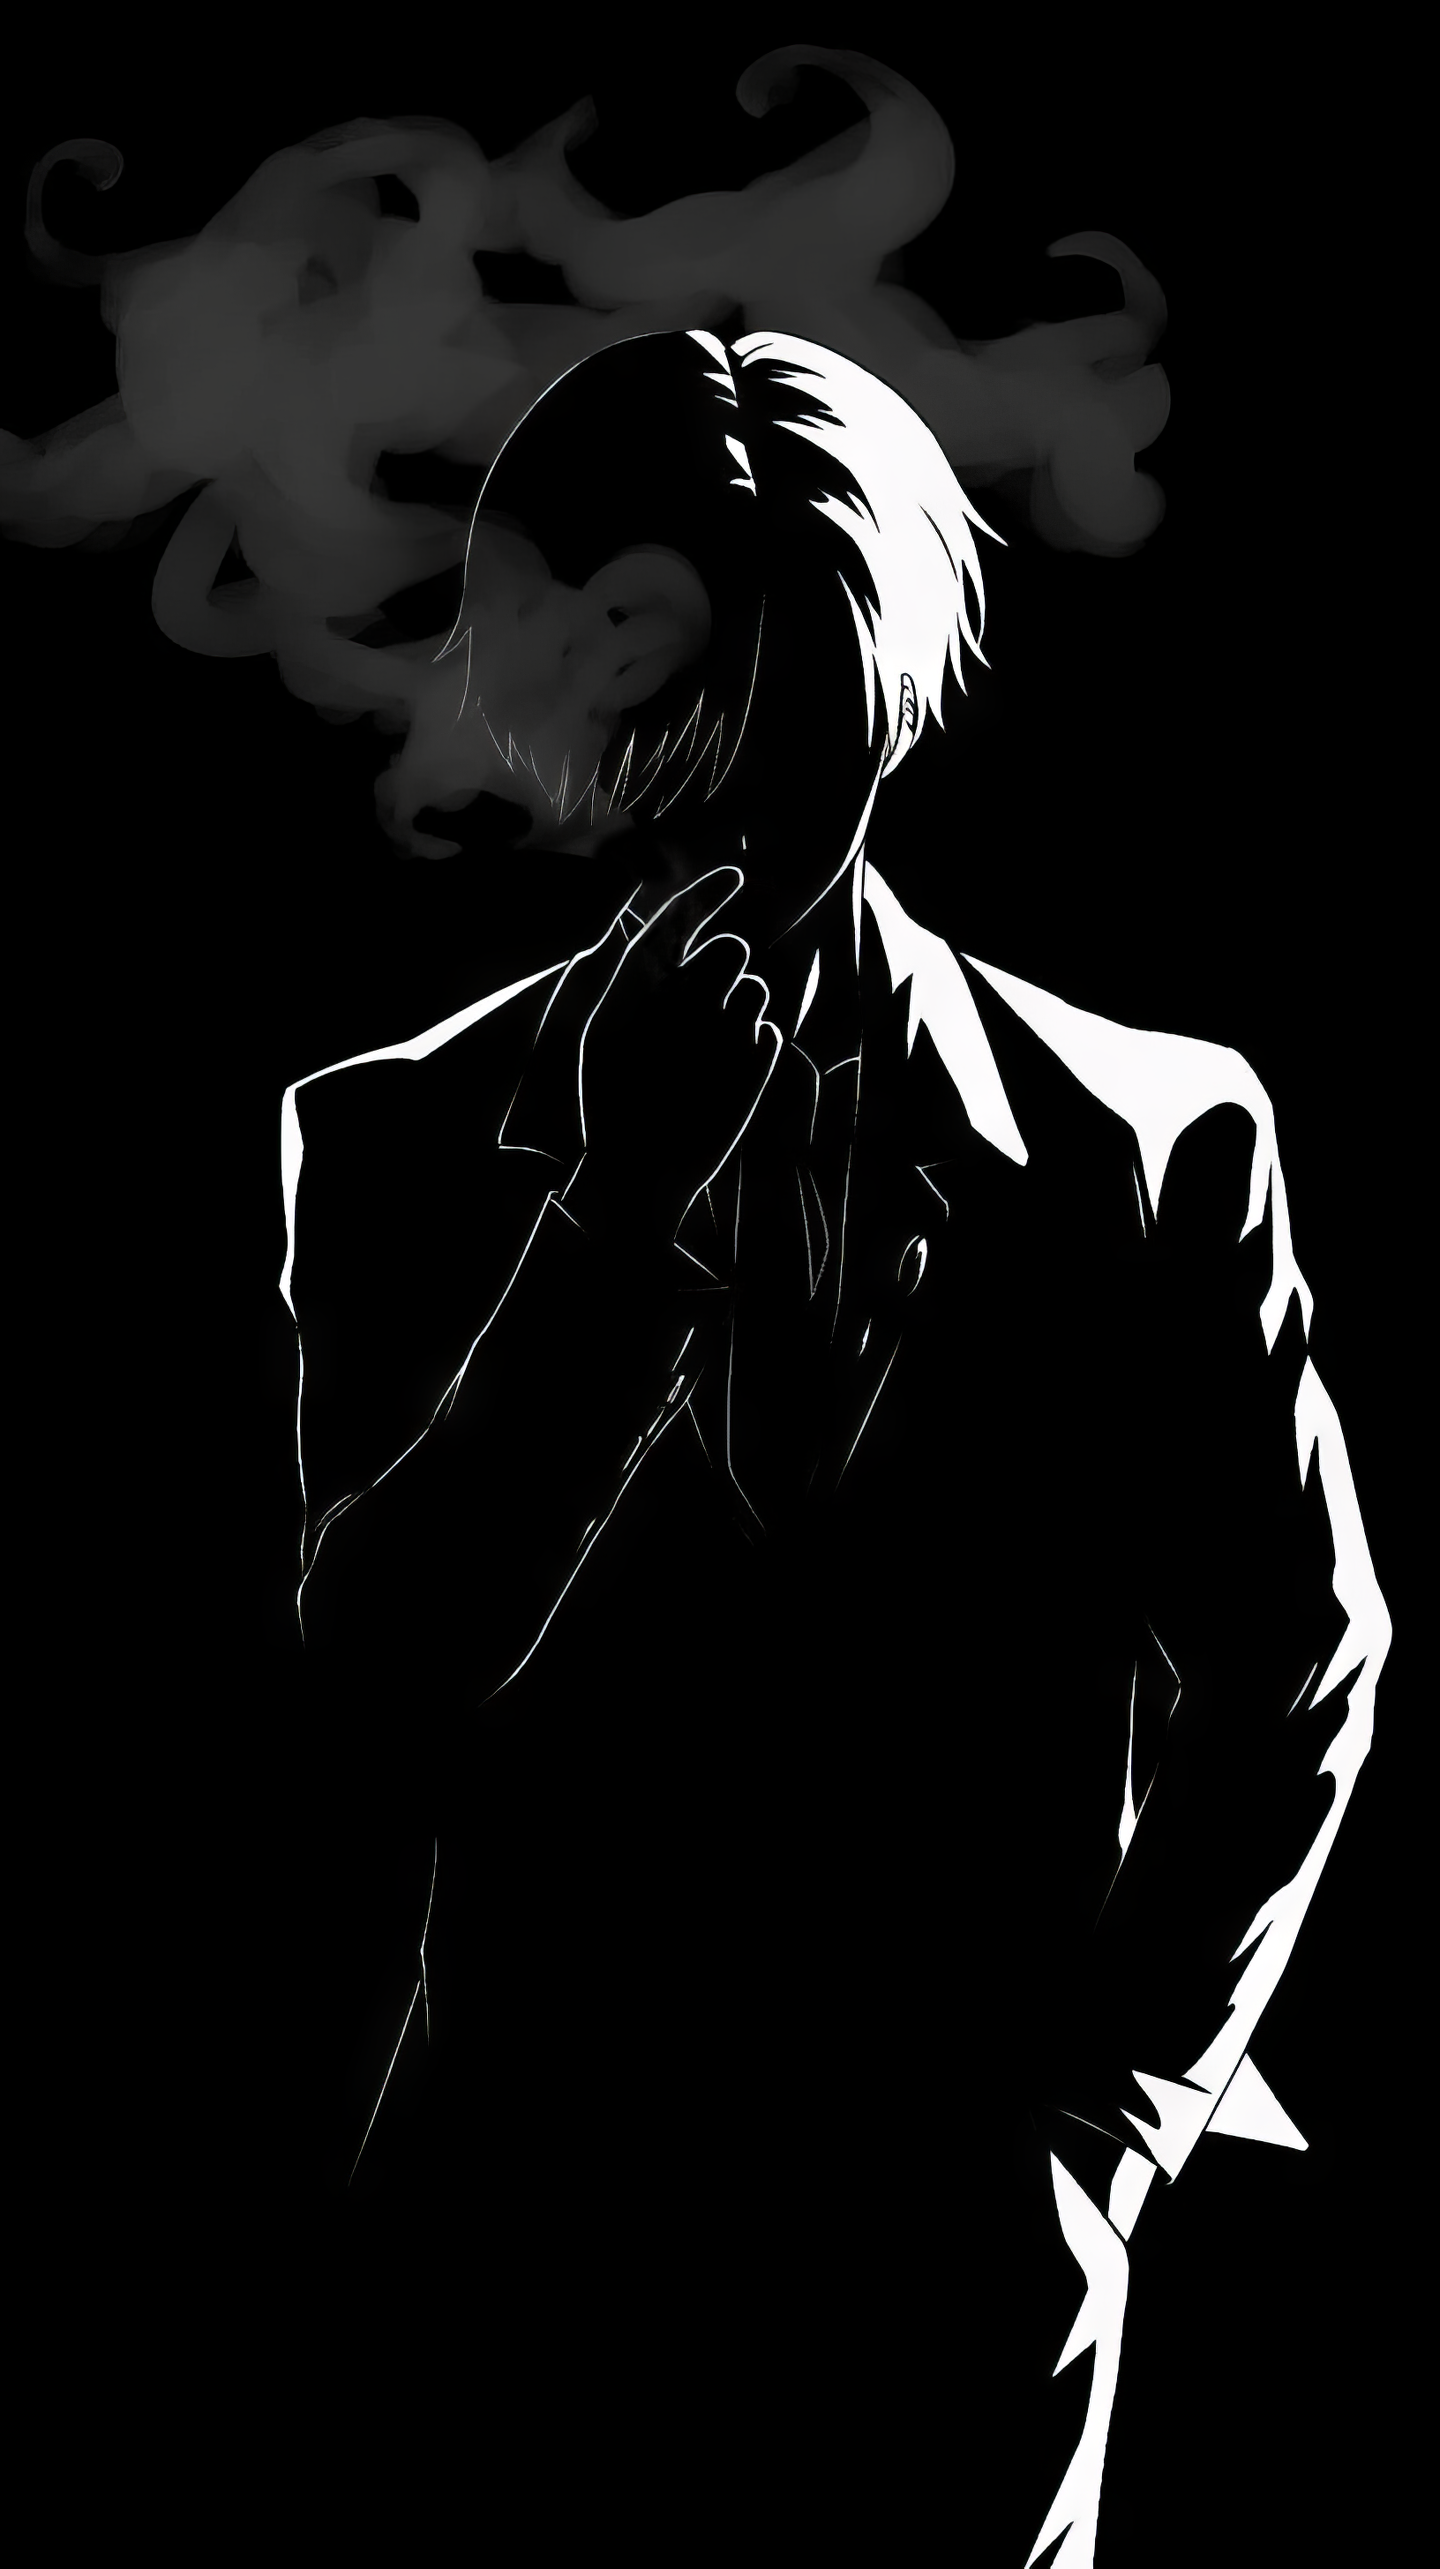 Silhouette of Sanji from One Piece in black and white, ideal for a phone wallpaper.